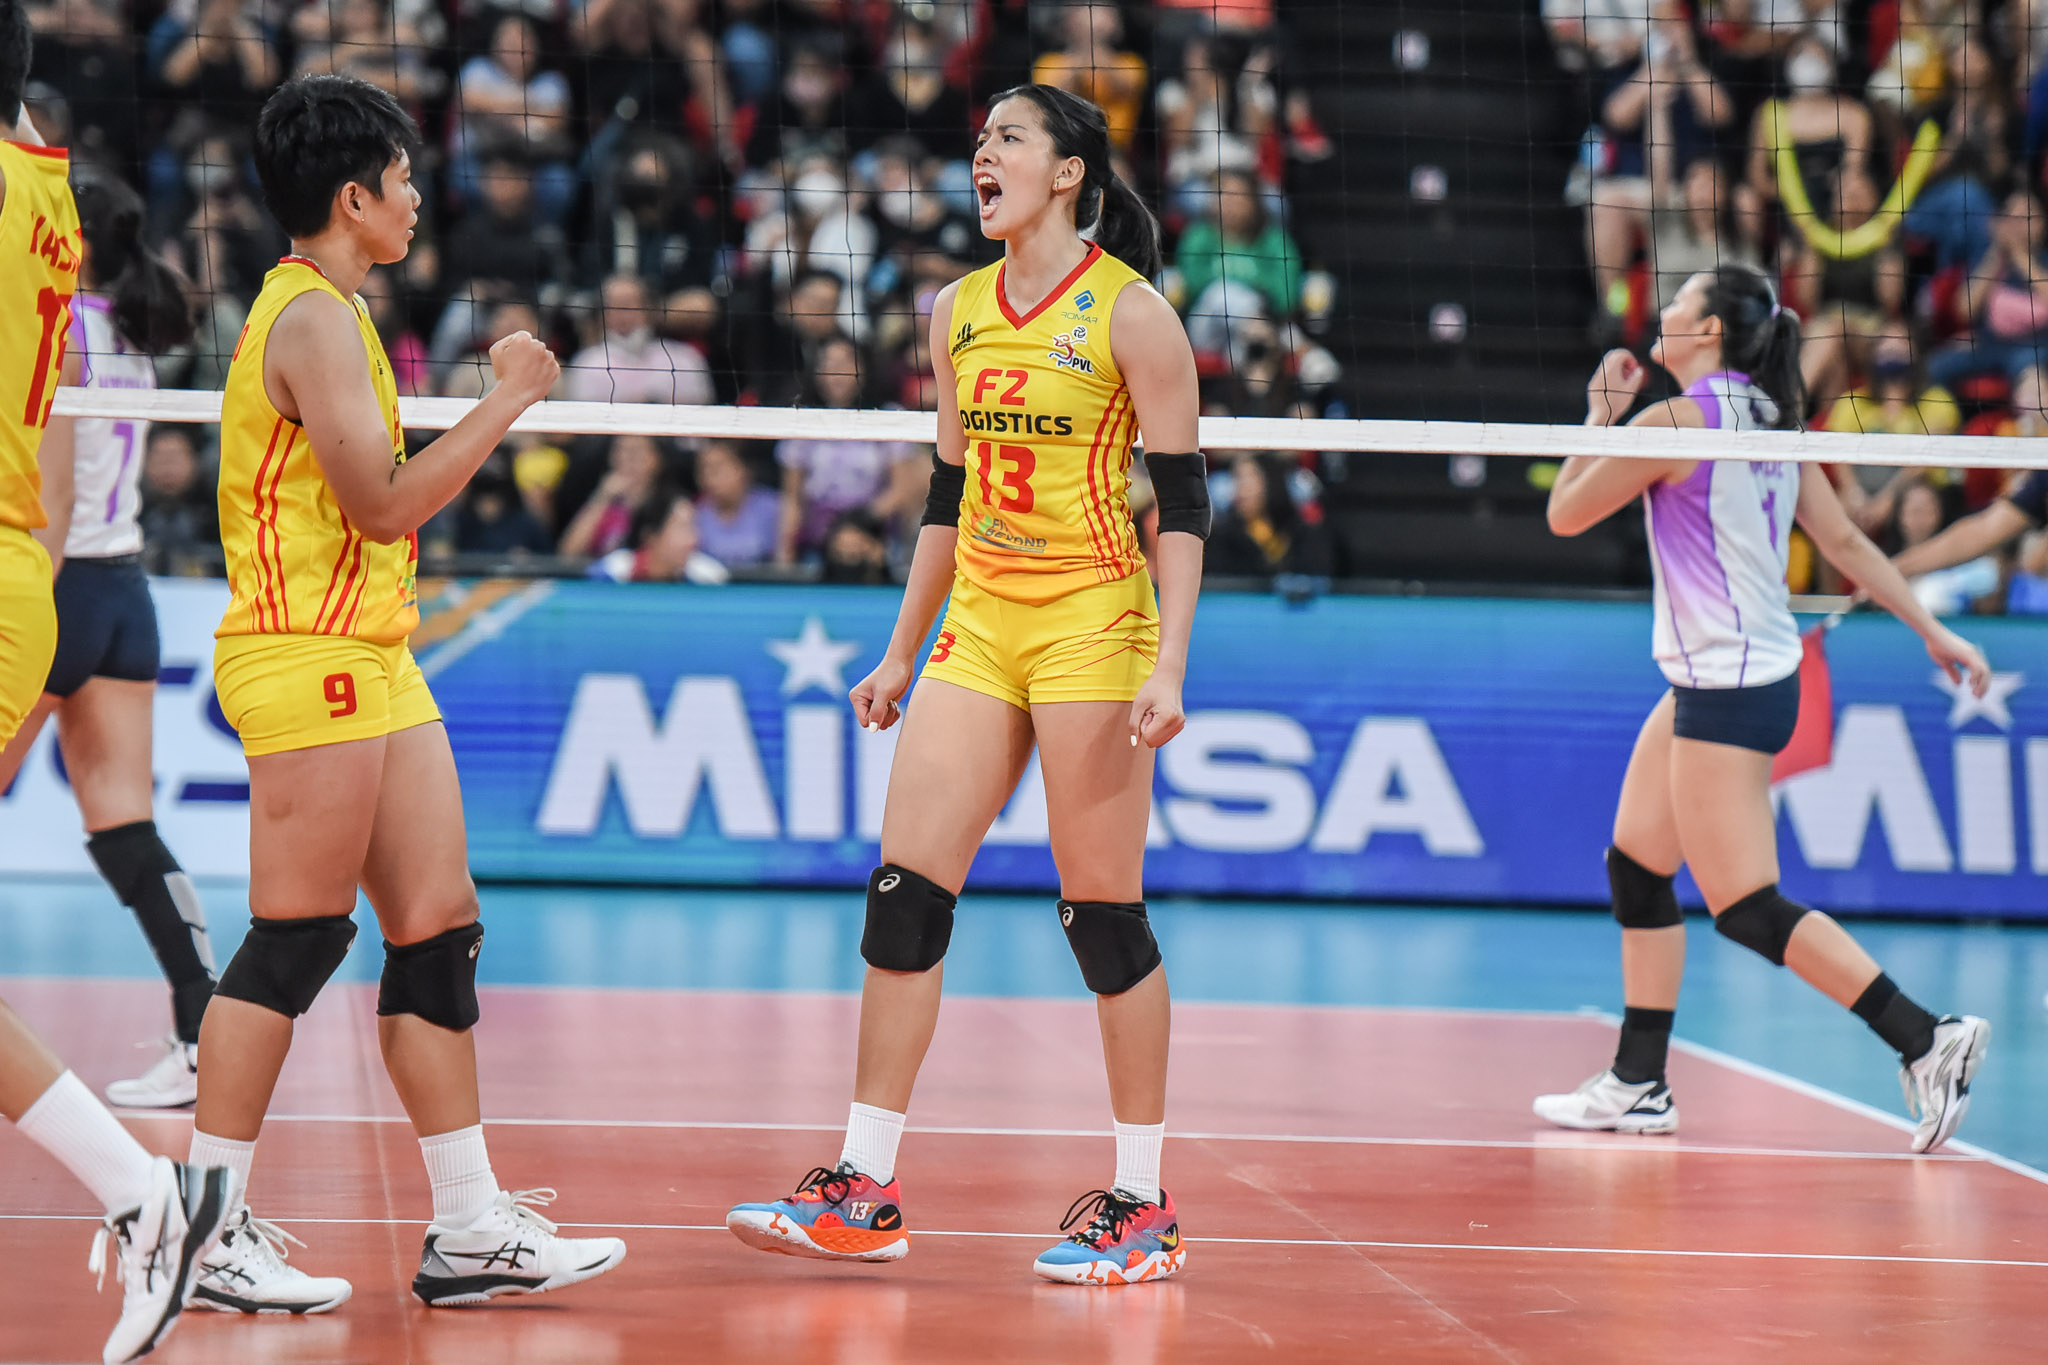 PVL-2023-F2-vs.-Choco-Mucho-Kim-Dy-8170 Seeing Pablo go down fired up F2, says Dy News PVL Volleyball  - philippine sports news